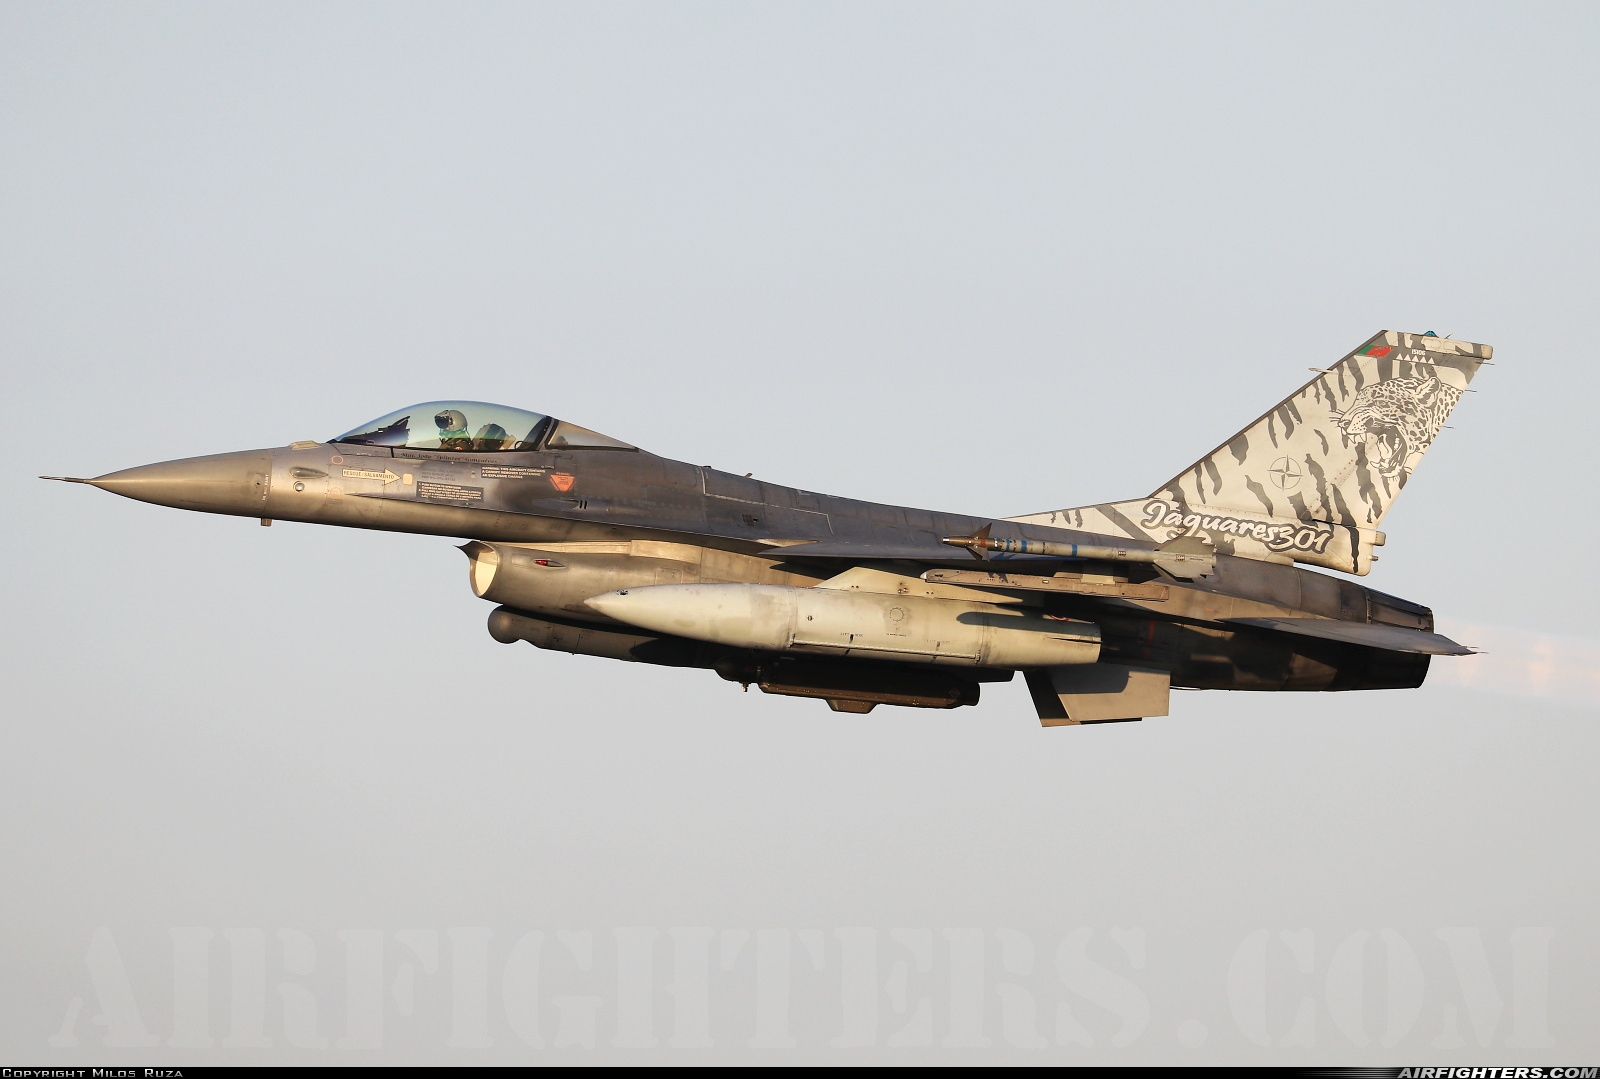 Portugal - Air Force General Dynamics F-16AM Fighting Falcon 15106 at Gioia del Colle-Bari (LIBV), Italy